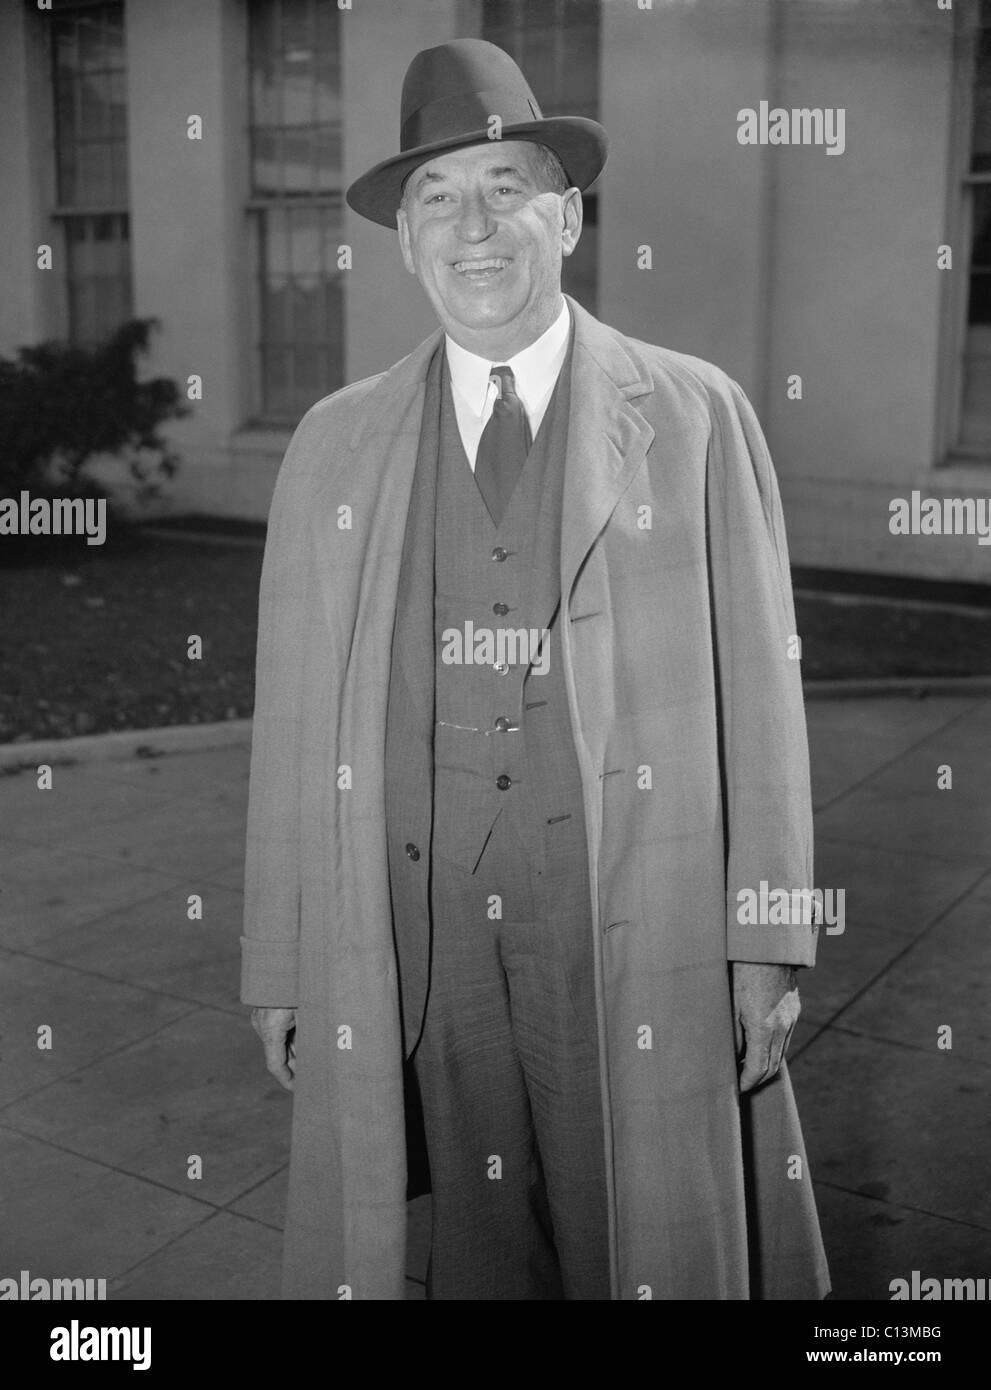 Walter Chrysler 1875-1940 automobile magnate leaving the White House after a meeting with President Roosevelt. October 8 1937. LC-DIG-hec-23465 Stock Photo